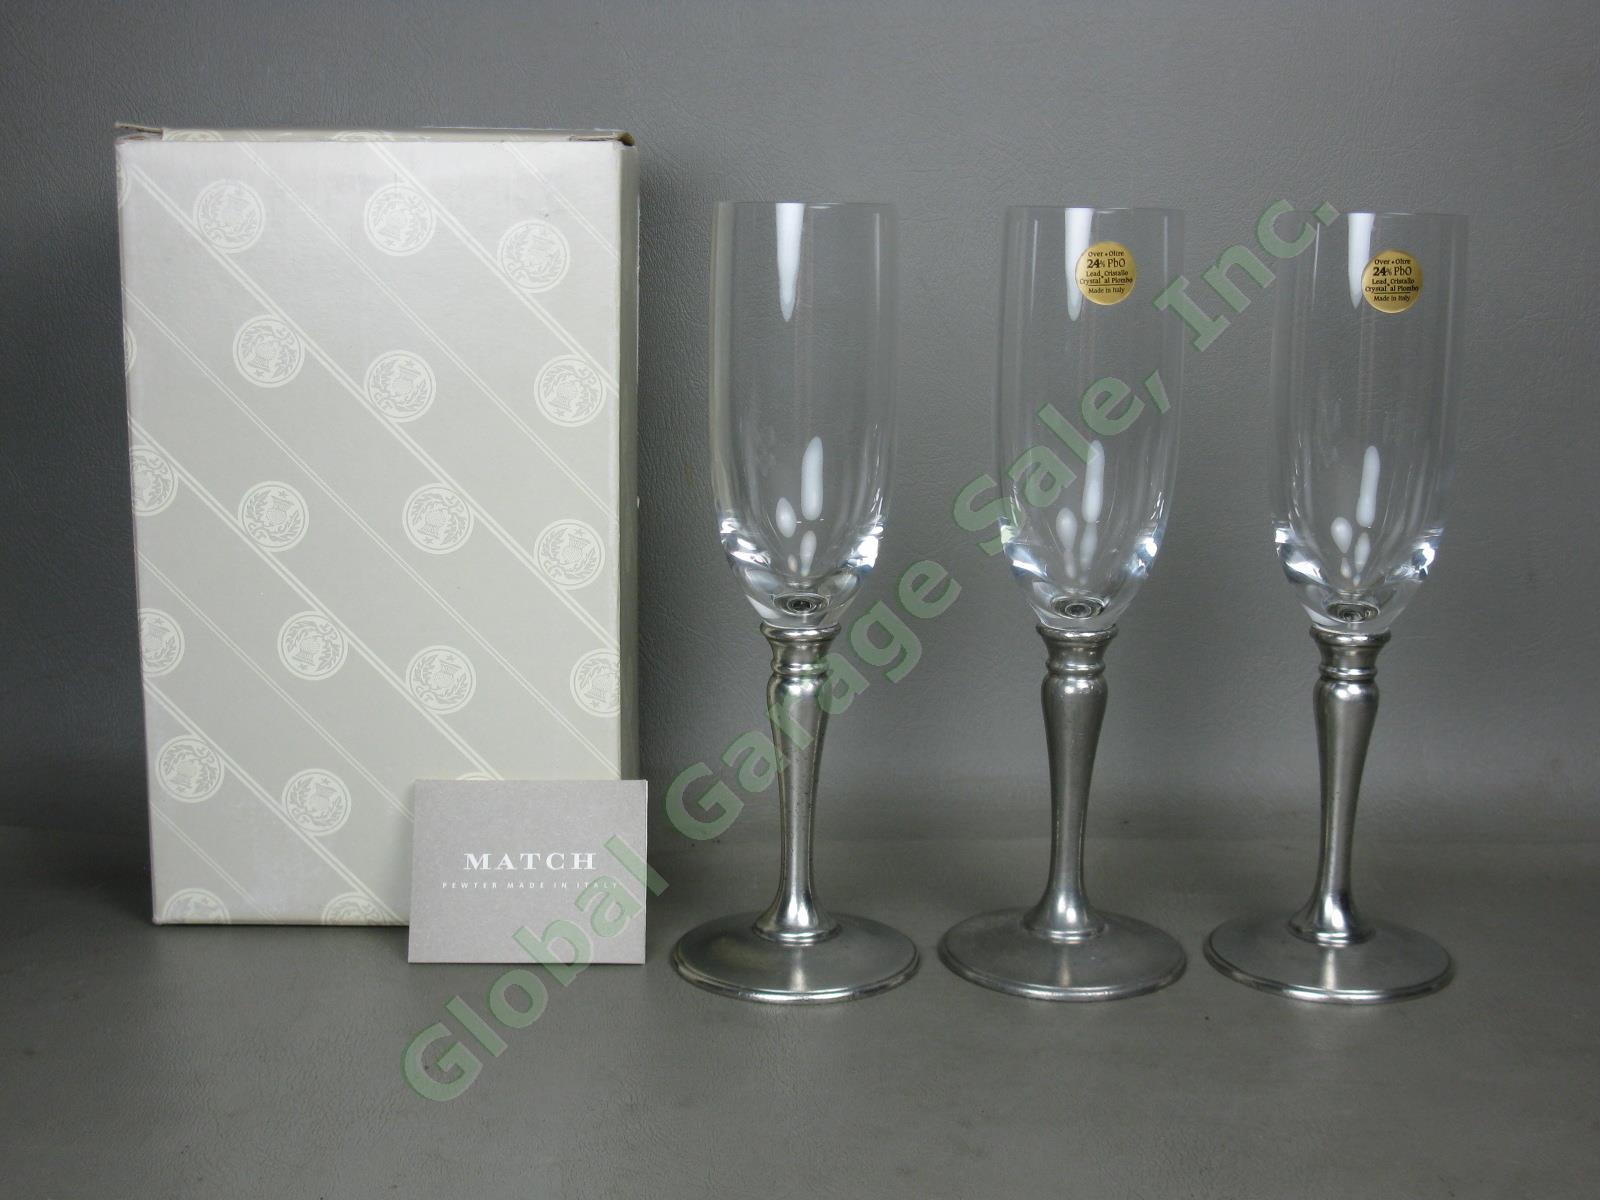 3 NEW Match Pewter 8" Champagne Flutes Glasses Made In Italy $90 Each Retail NR!